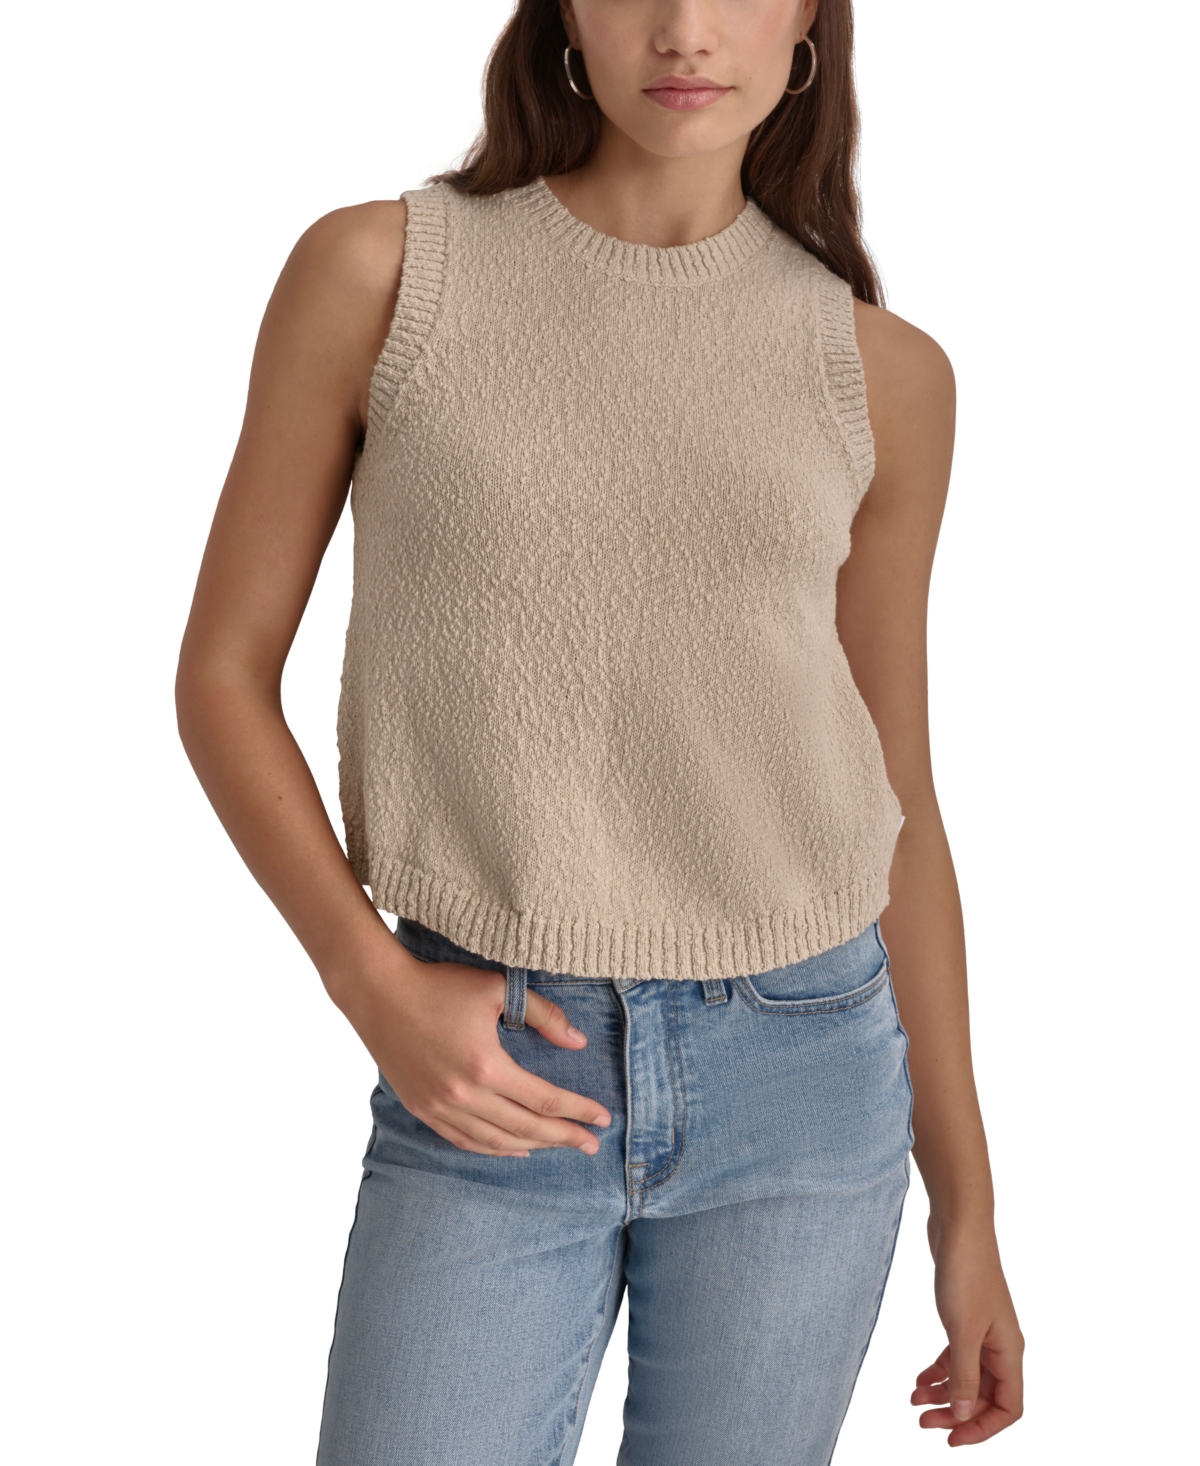 Dkny Jeans Women's Cotton Boucle Sleeveless Sweater In Pebble